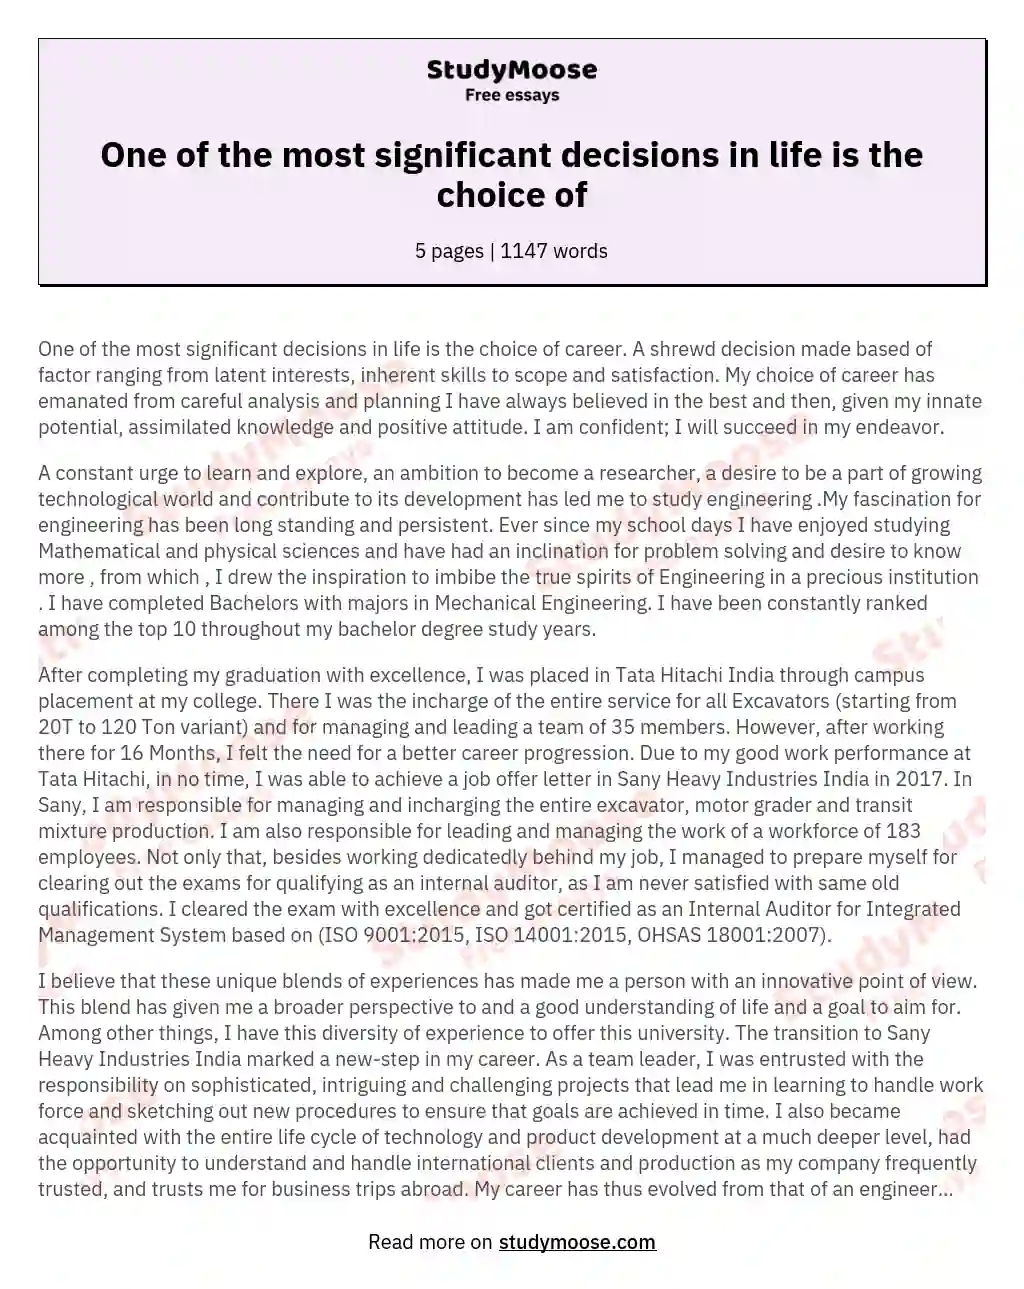 the best decision in my life essay